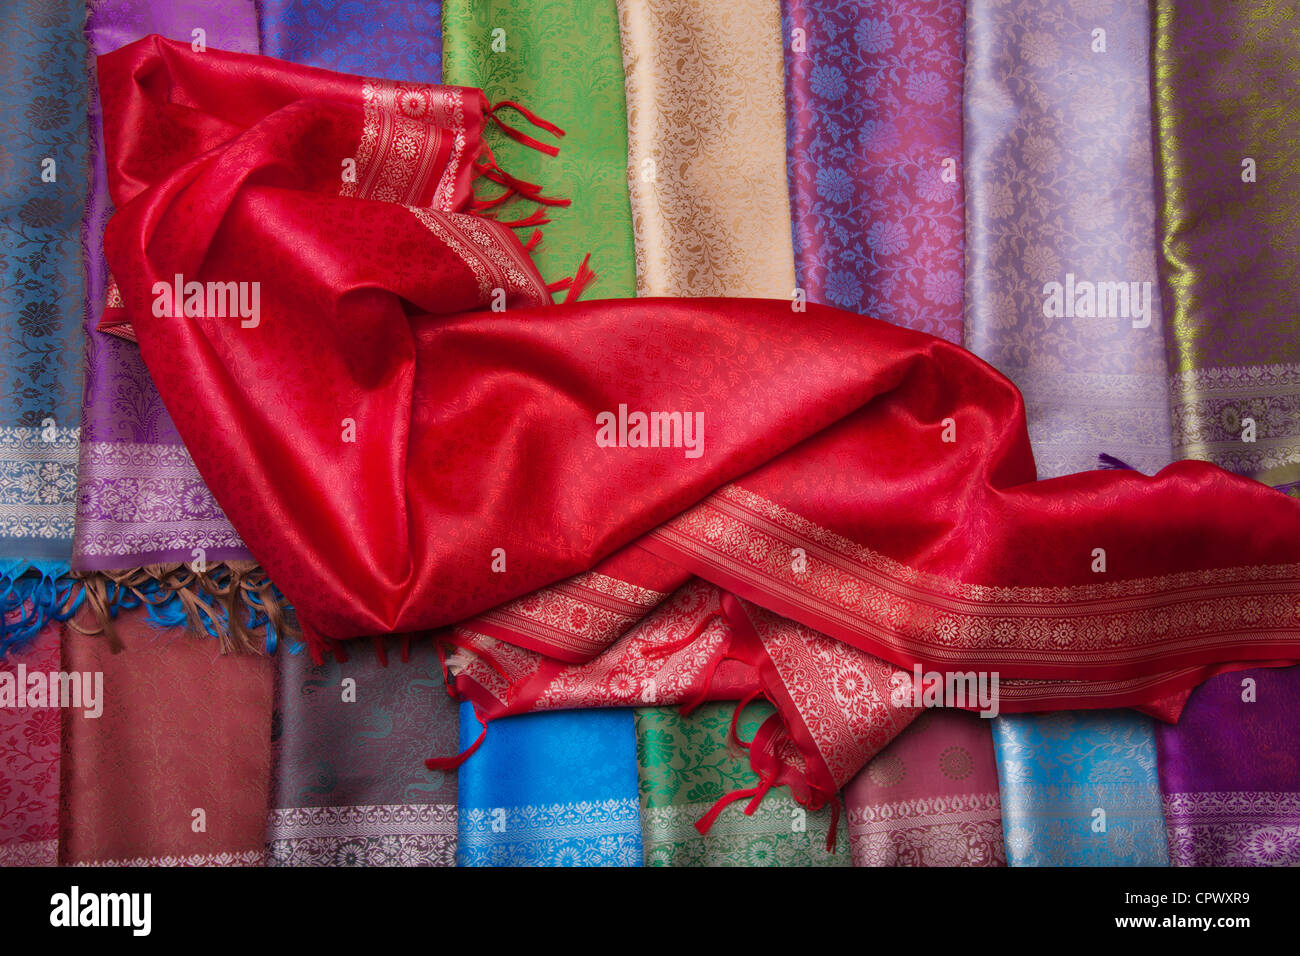 Red fabric on the counter with many different headscarfs Stock Photo